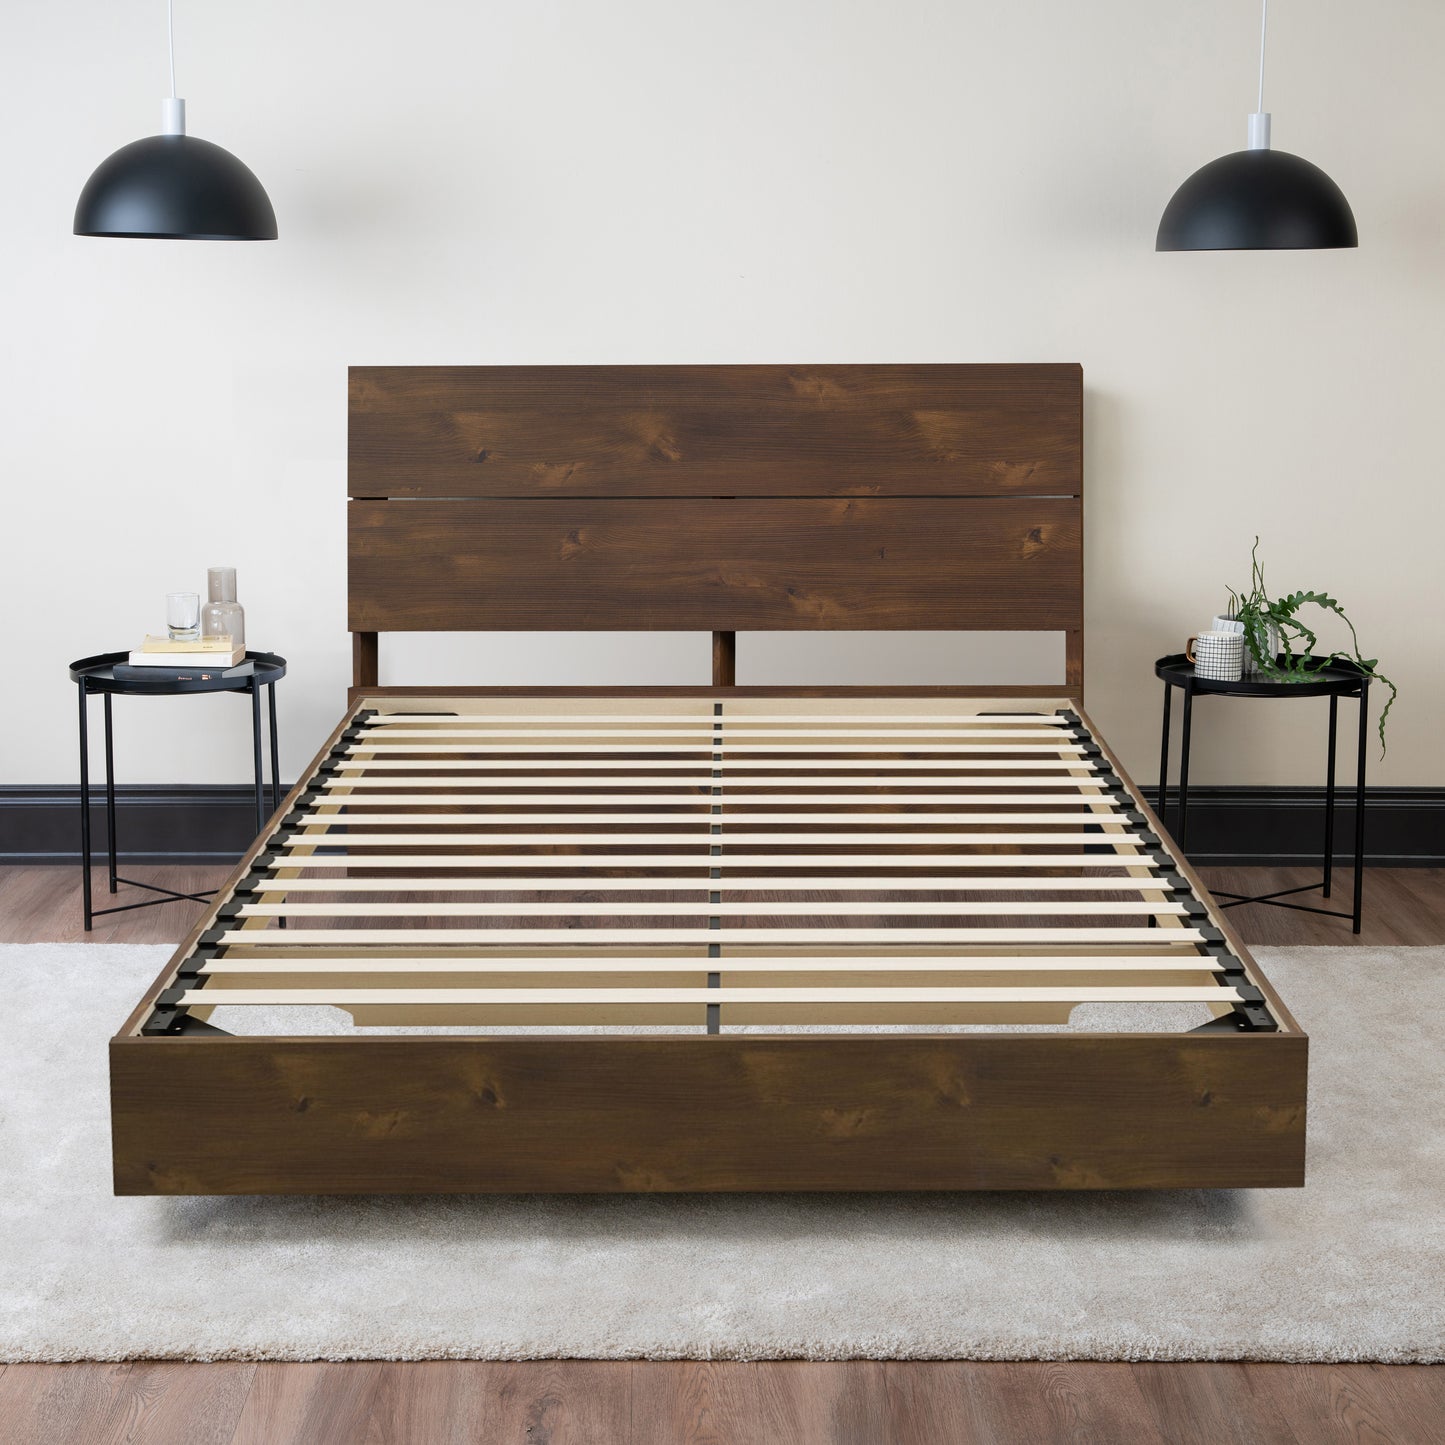 Floating Wood Bed with Headboard